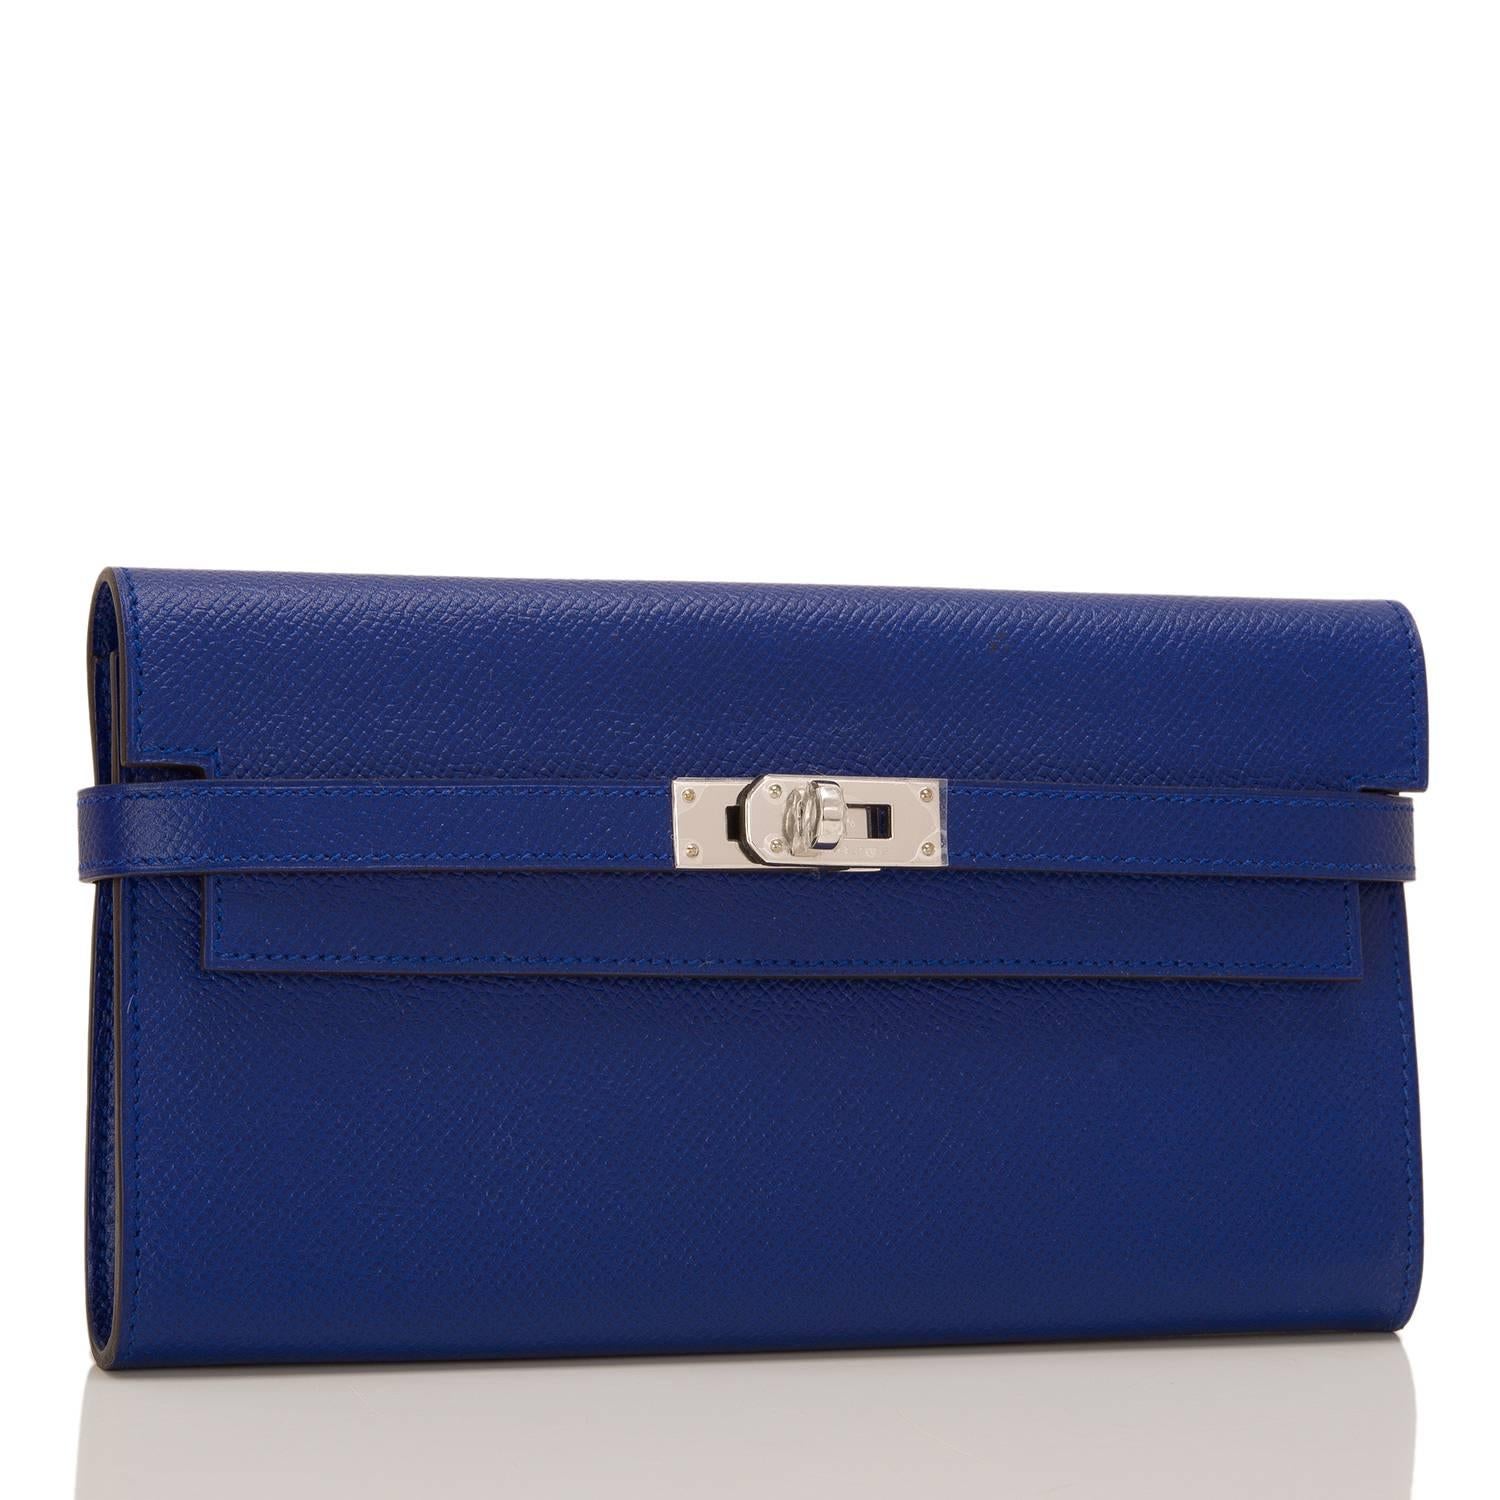 Hermes Blue Electric epsom Kelly Longue Wallet with palladium hardware.

This style features tonal stitching, palladium hardware, front toggle closure and gusseted sides.

The interior is lined in Blue Electric chevre leather and features one front